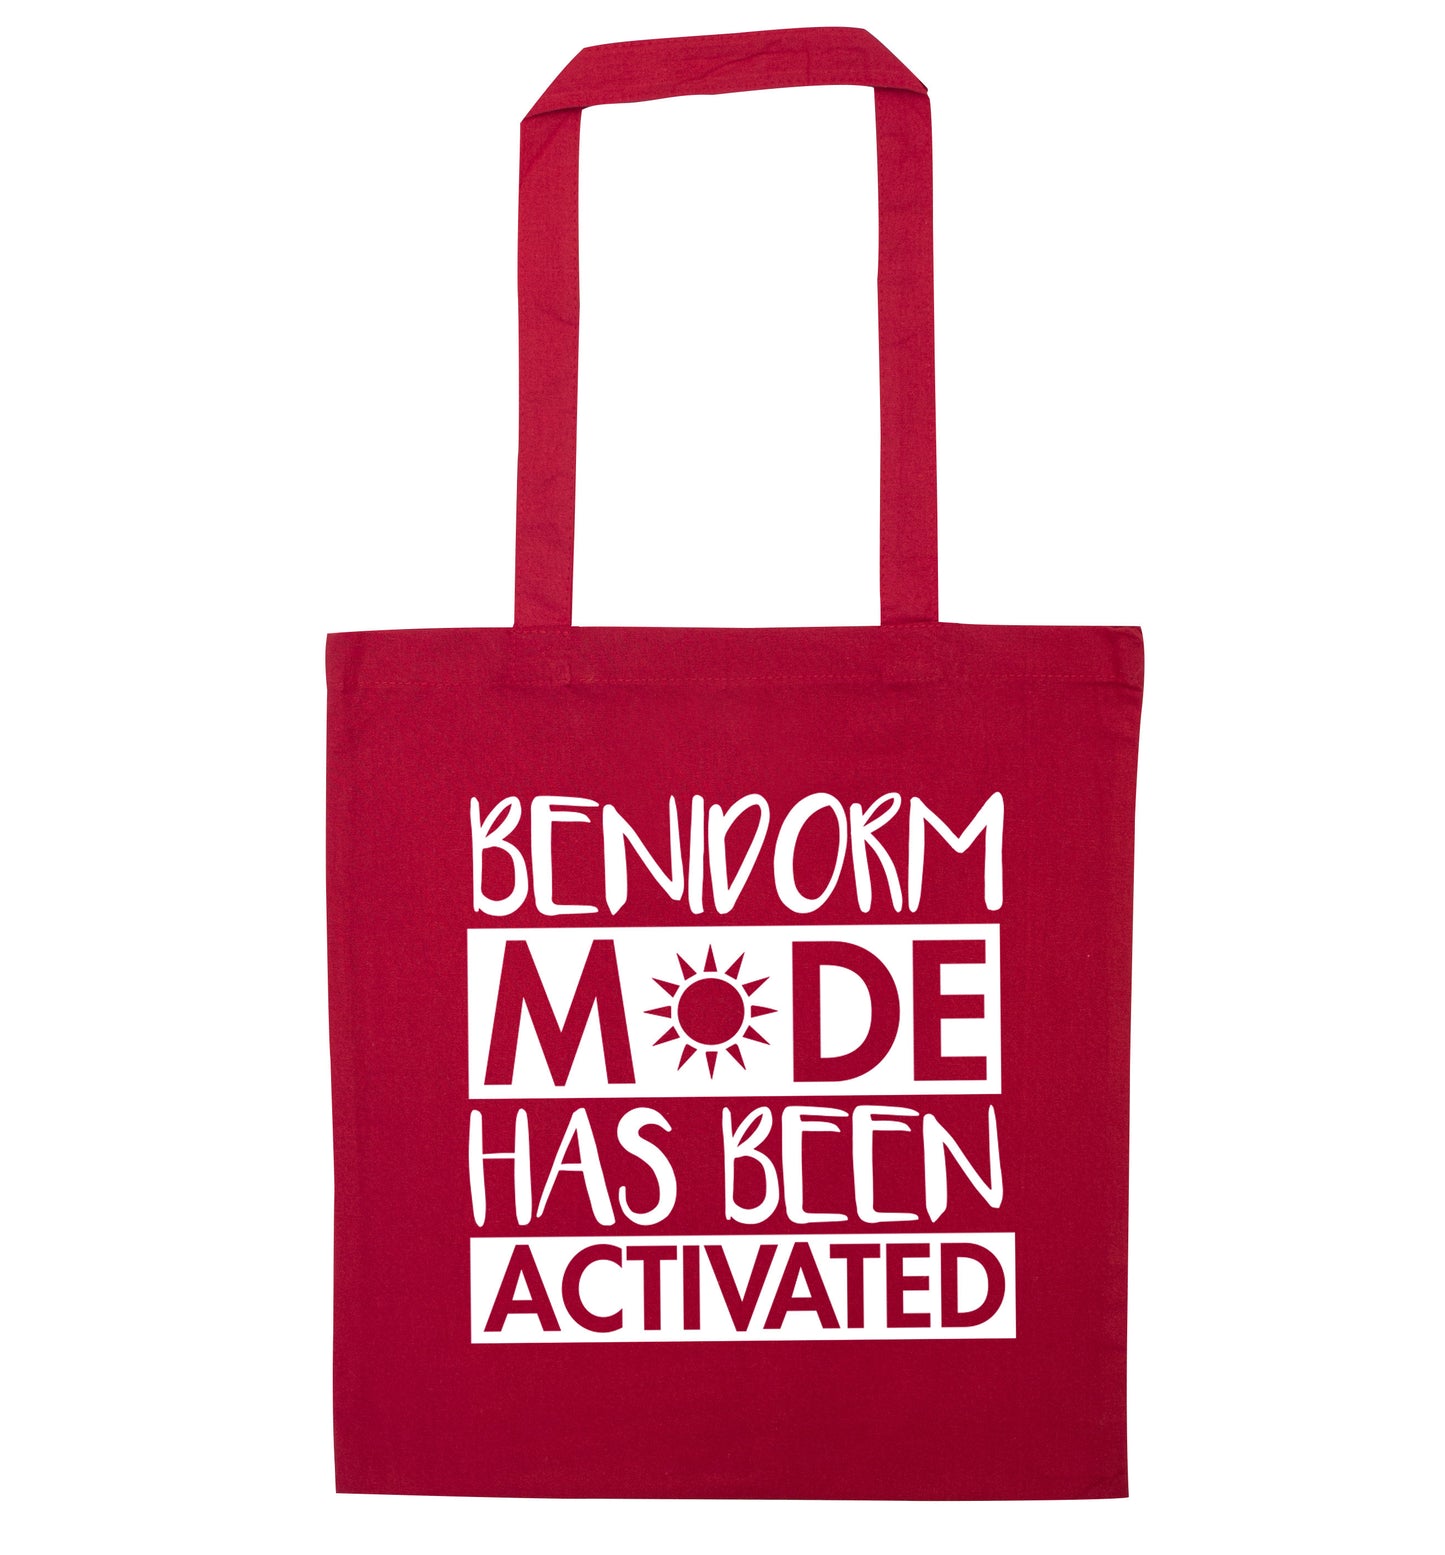 Benidorm mode has been activated red tote bag